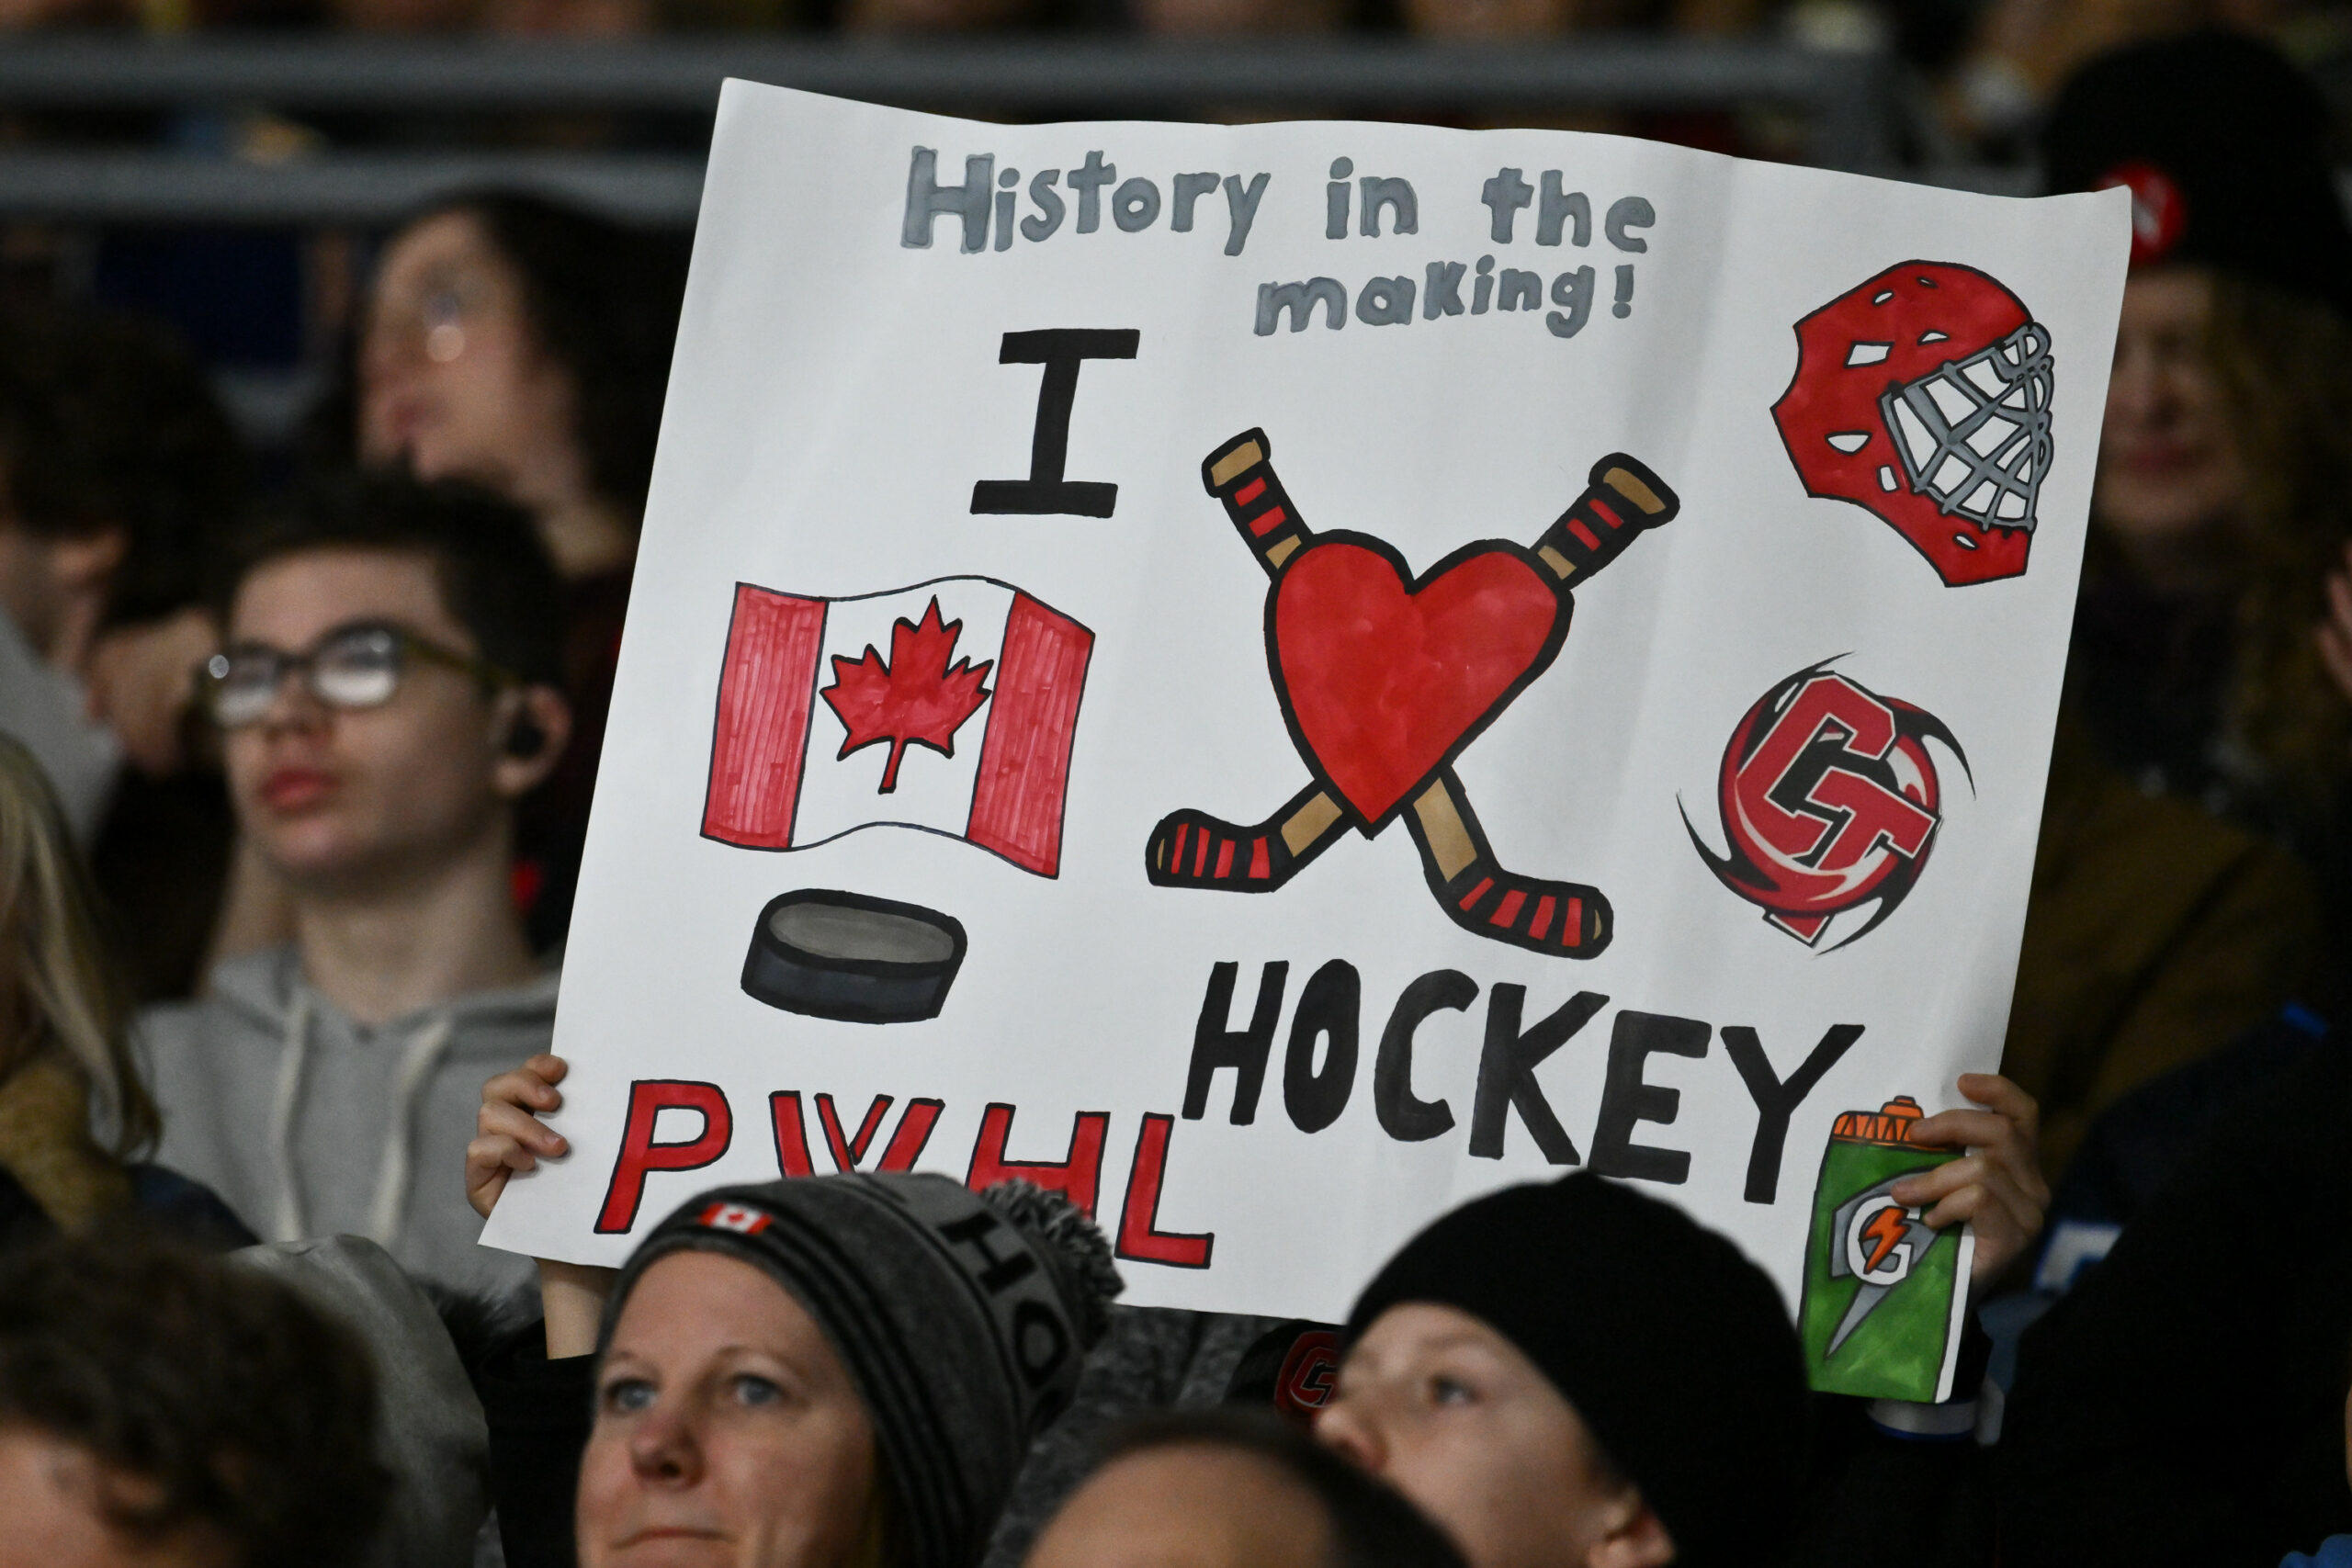 pwhl betting canada: spectator holding a sign at pwhl game in ottawa